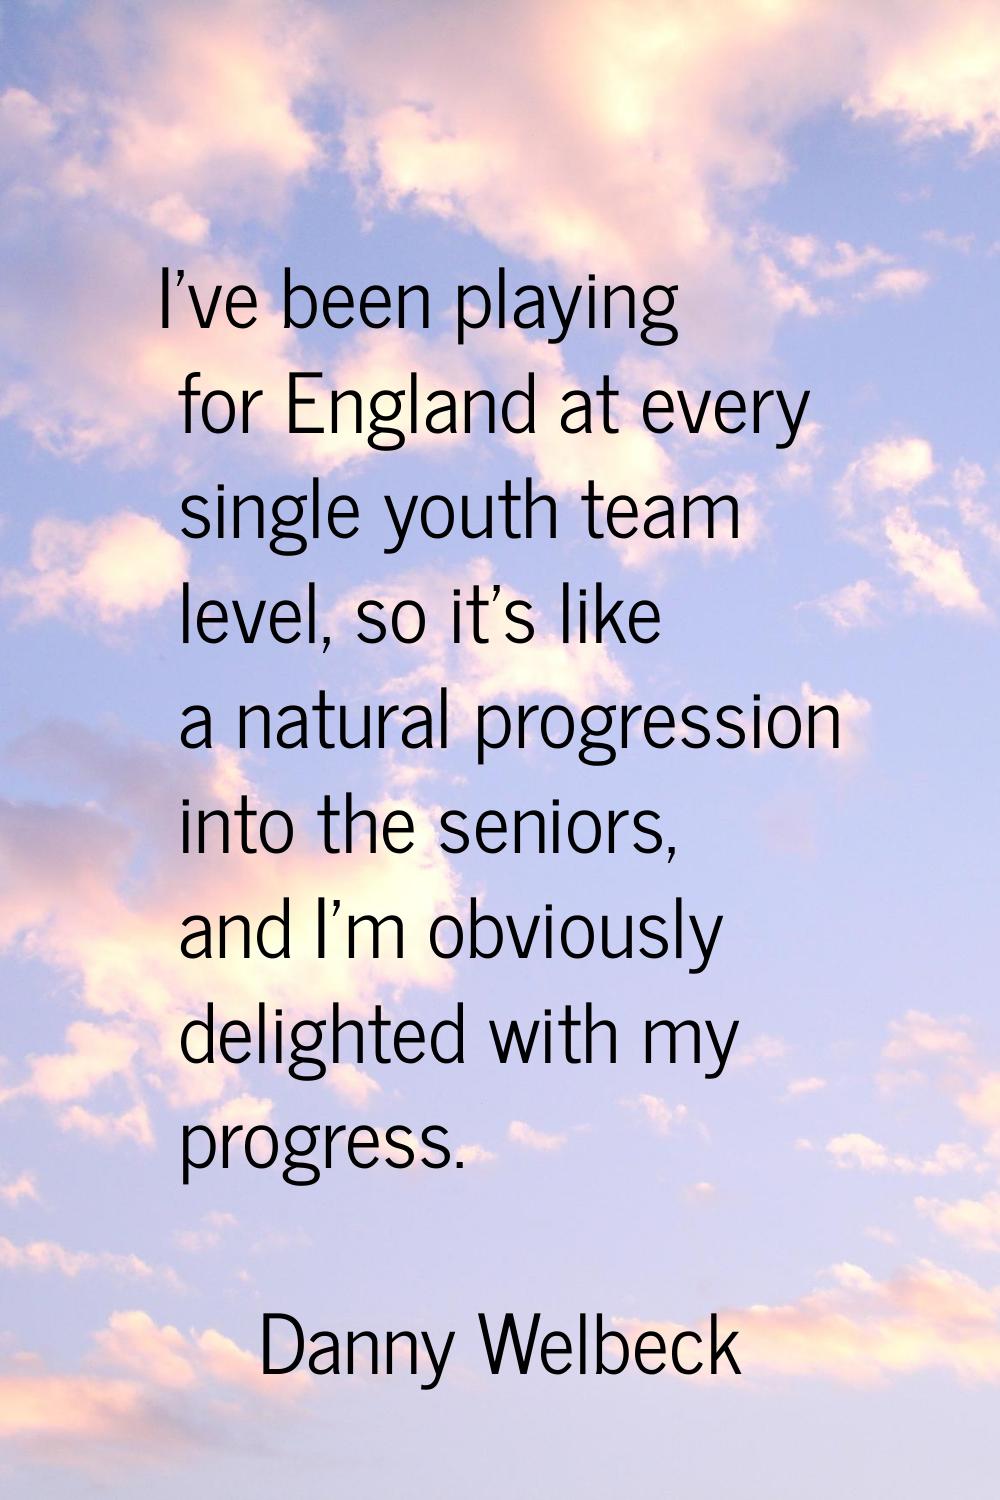 I've been playing for England at every single youth team level, so it's like a natural progression 